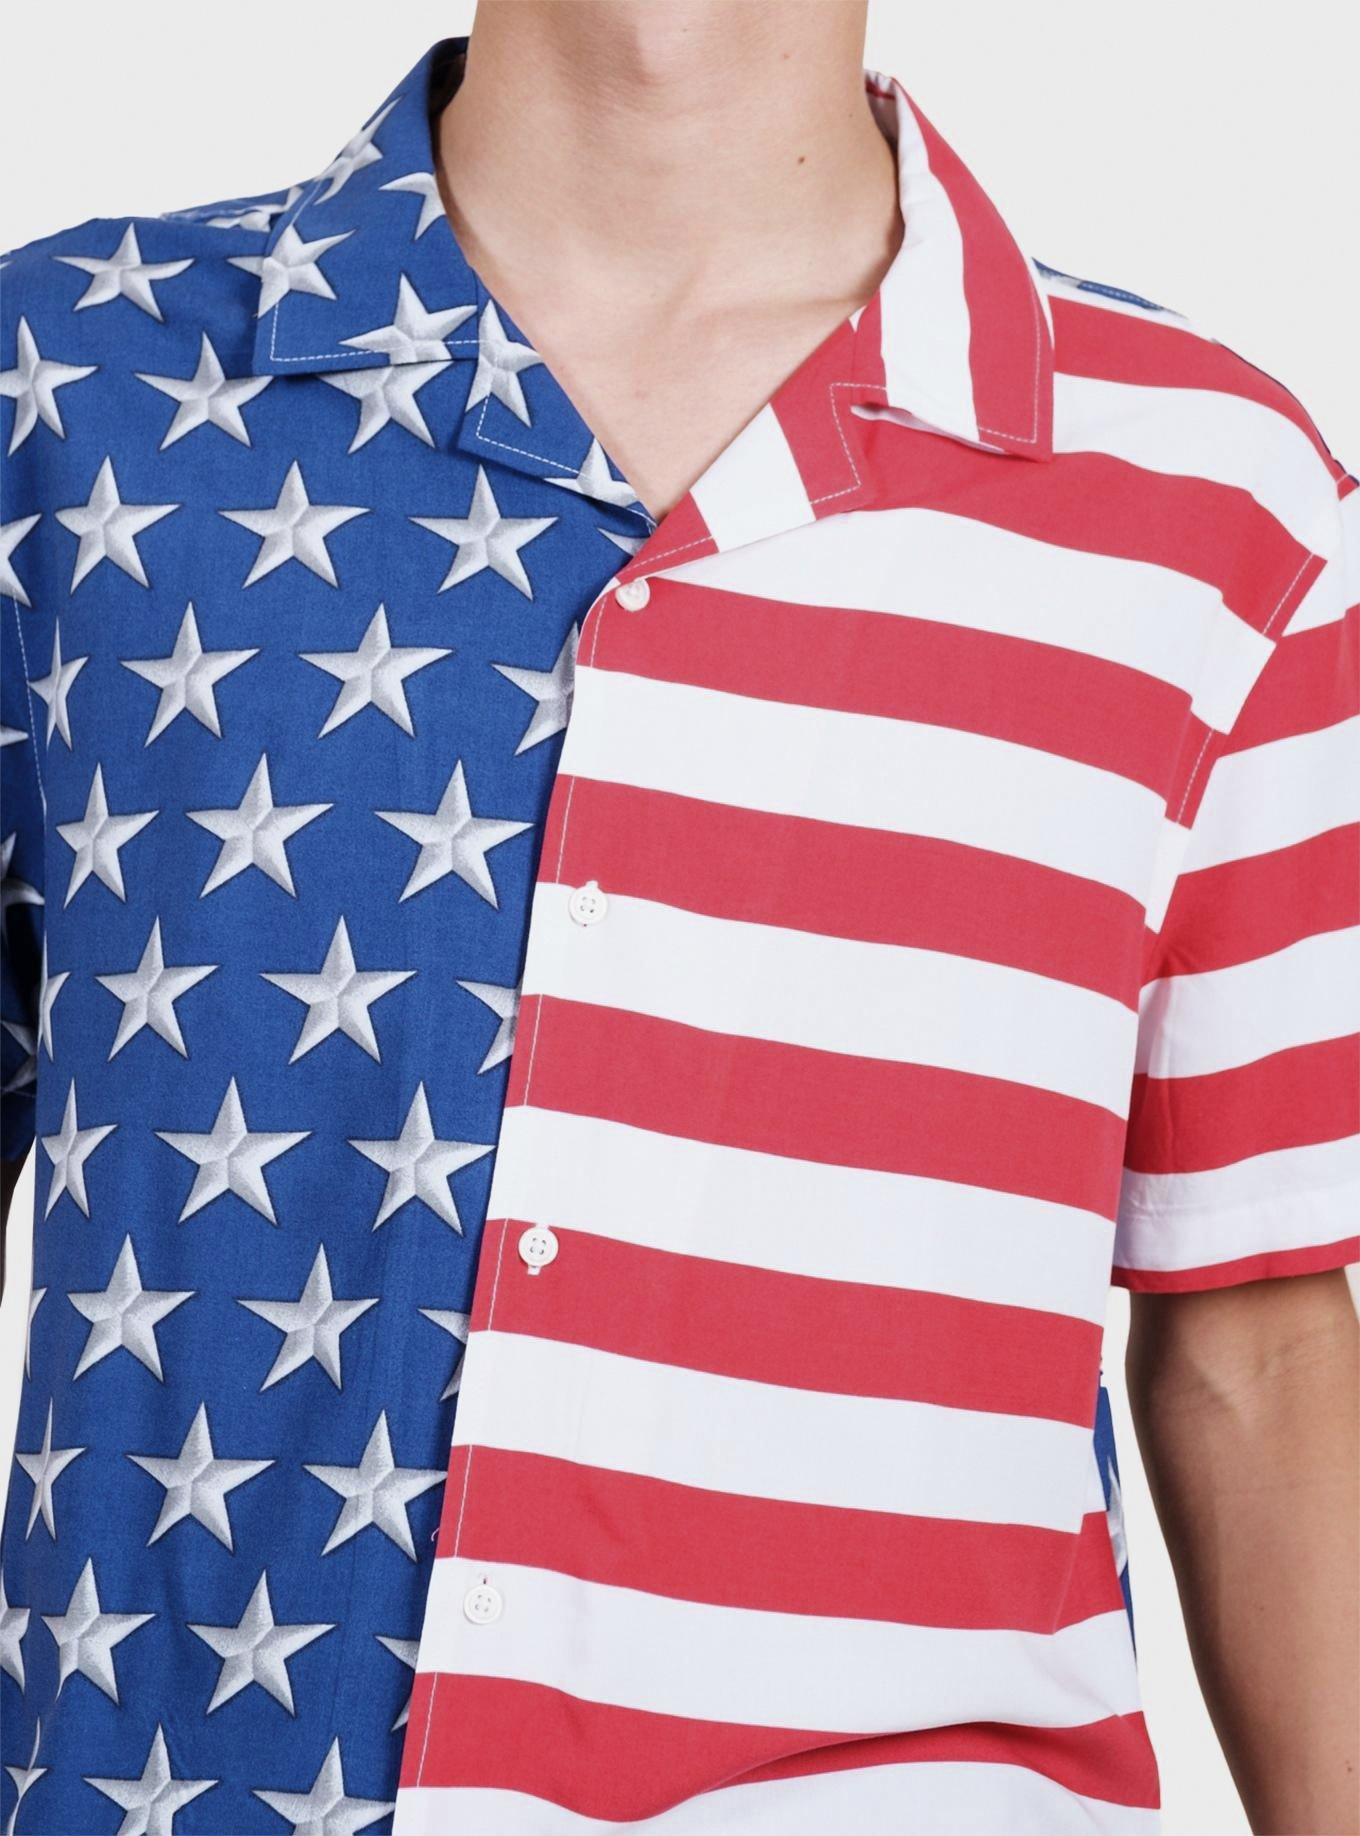 Split Flag Woven Shirt in Red, White, and Blue Button Up, RED  WHITE  BLUE, alternate